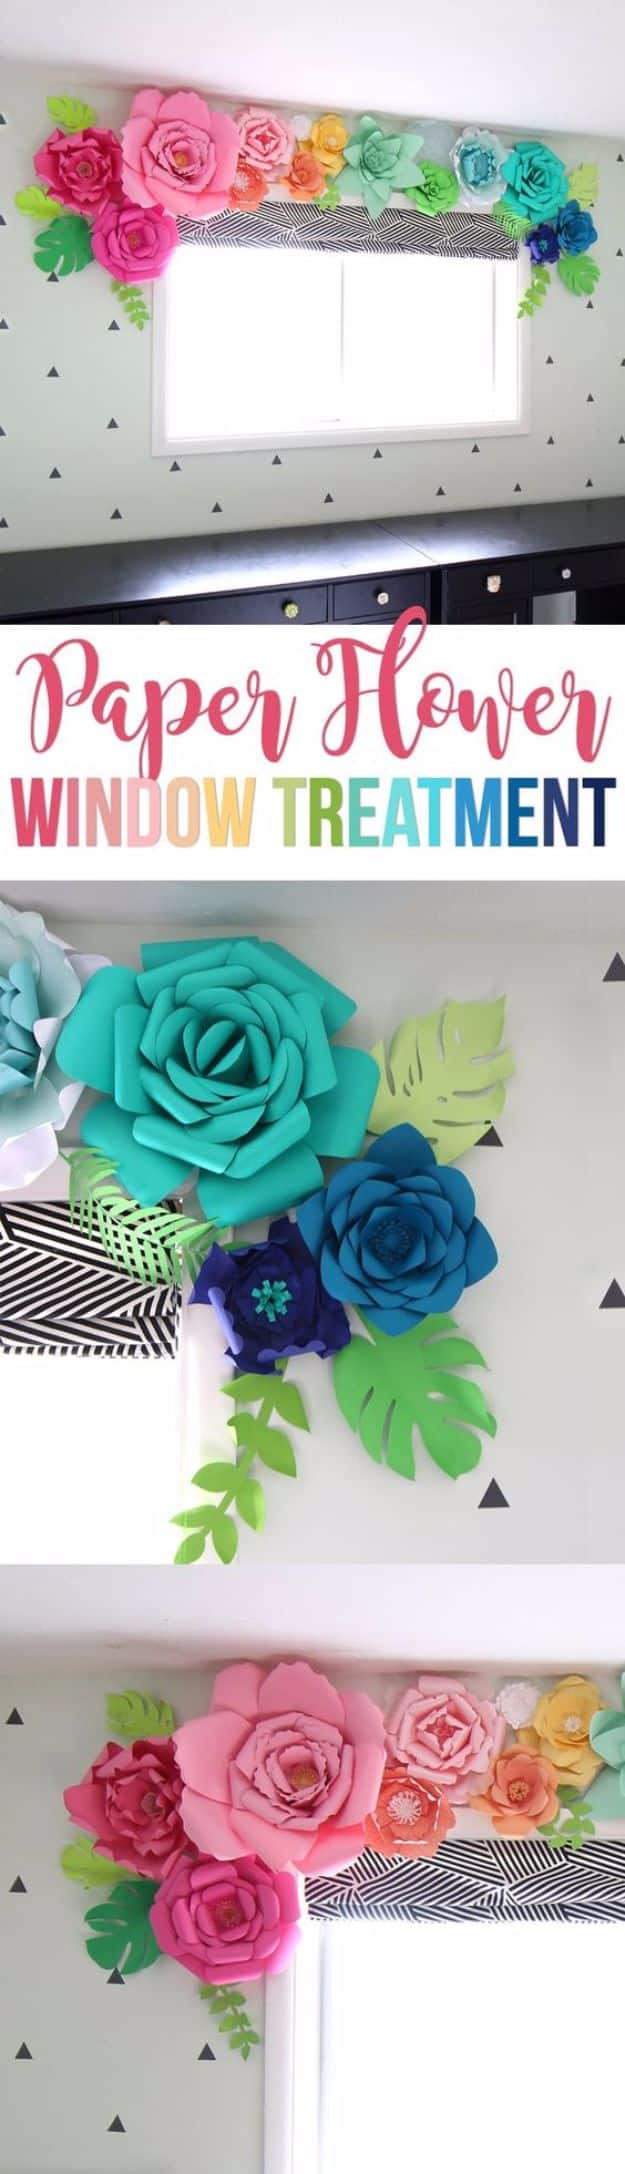 DIY Paper Flowers - Giant Paper Flower Window Treatment - How To Make A Paper Flower - Large Wedding Backdrop for Wall Decor - Easy Tissue Paper Flower Tutorial for Kids - Giant Projects for Photo Backdrops - Daisy, Roses, Bouquets, Centerpieces - Cricut Template and Step by Step Tutorial 